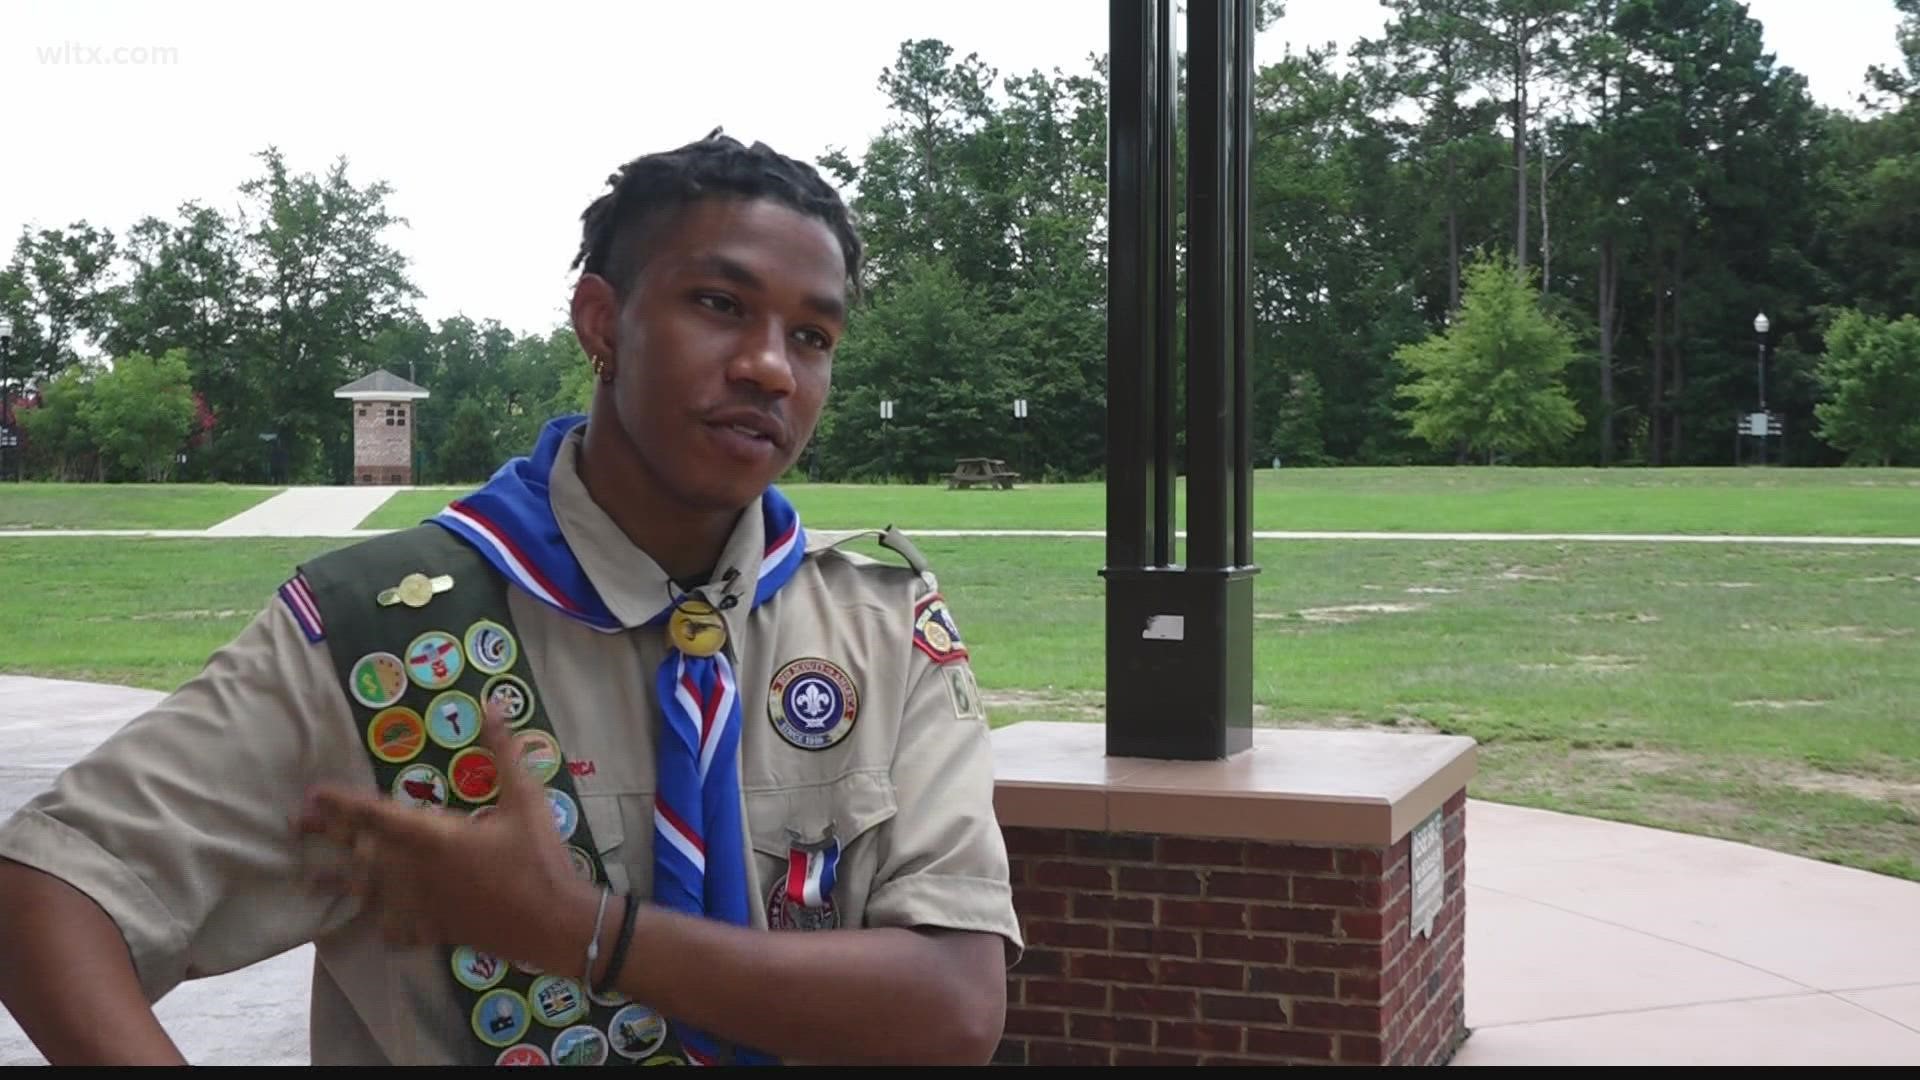 Eagle Scout is the highest rank for the Boy Scouts of America. Many leave the program before earning the title. But Anthony didn't.